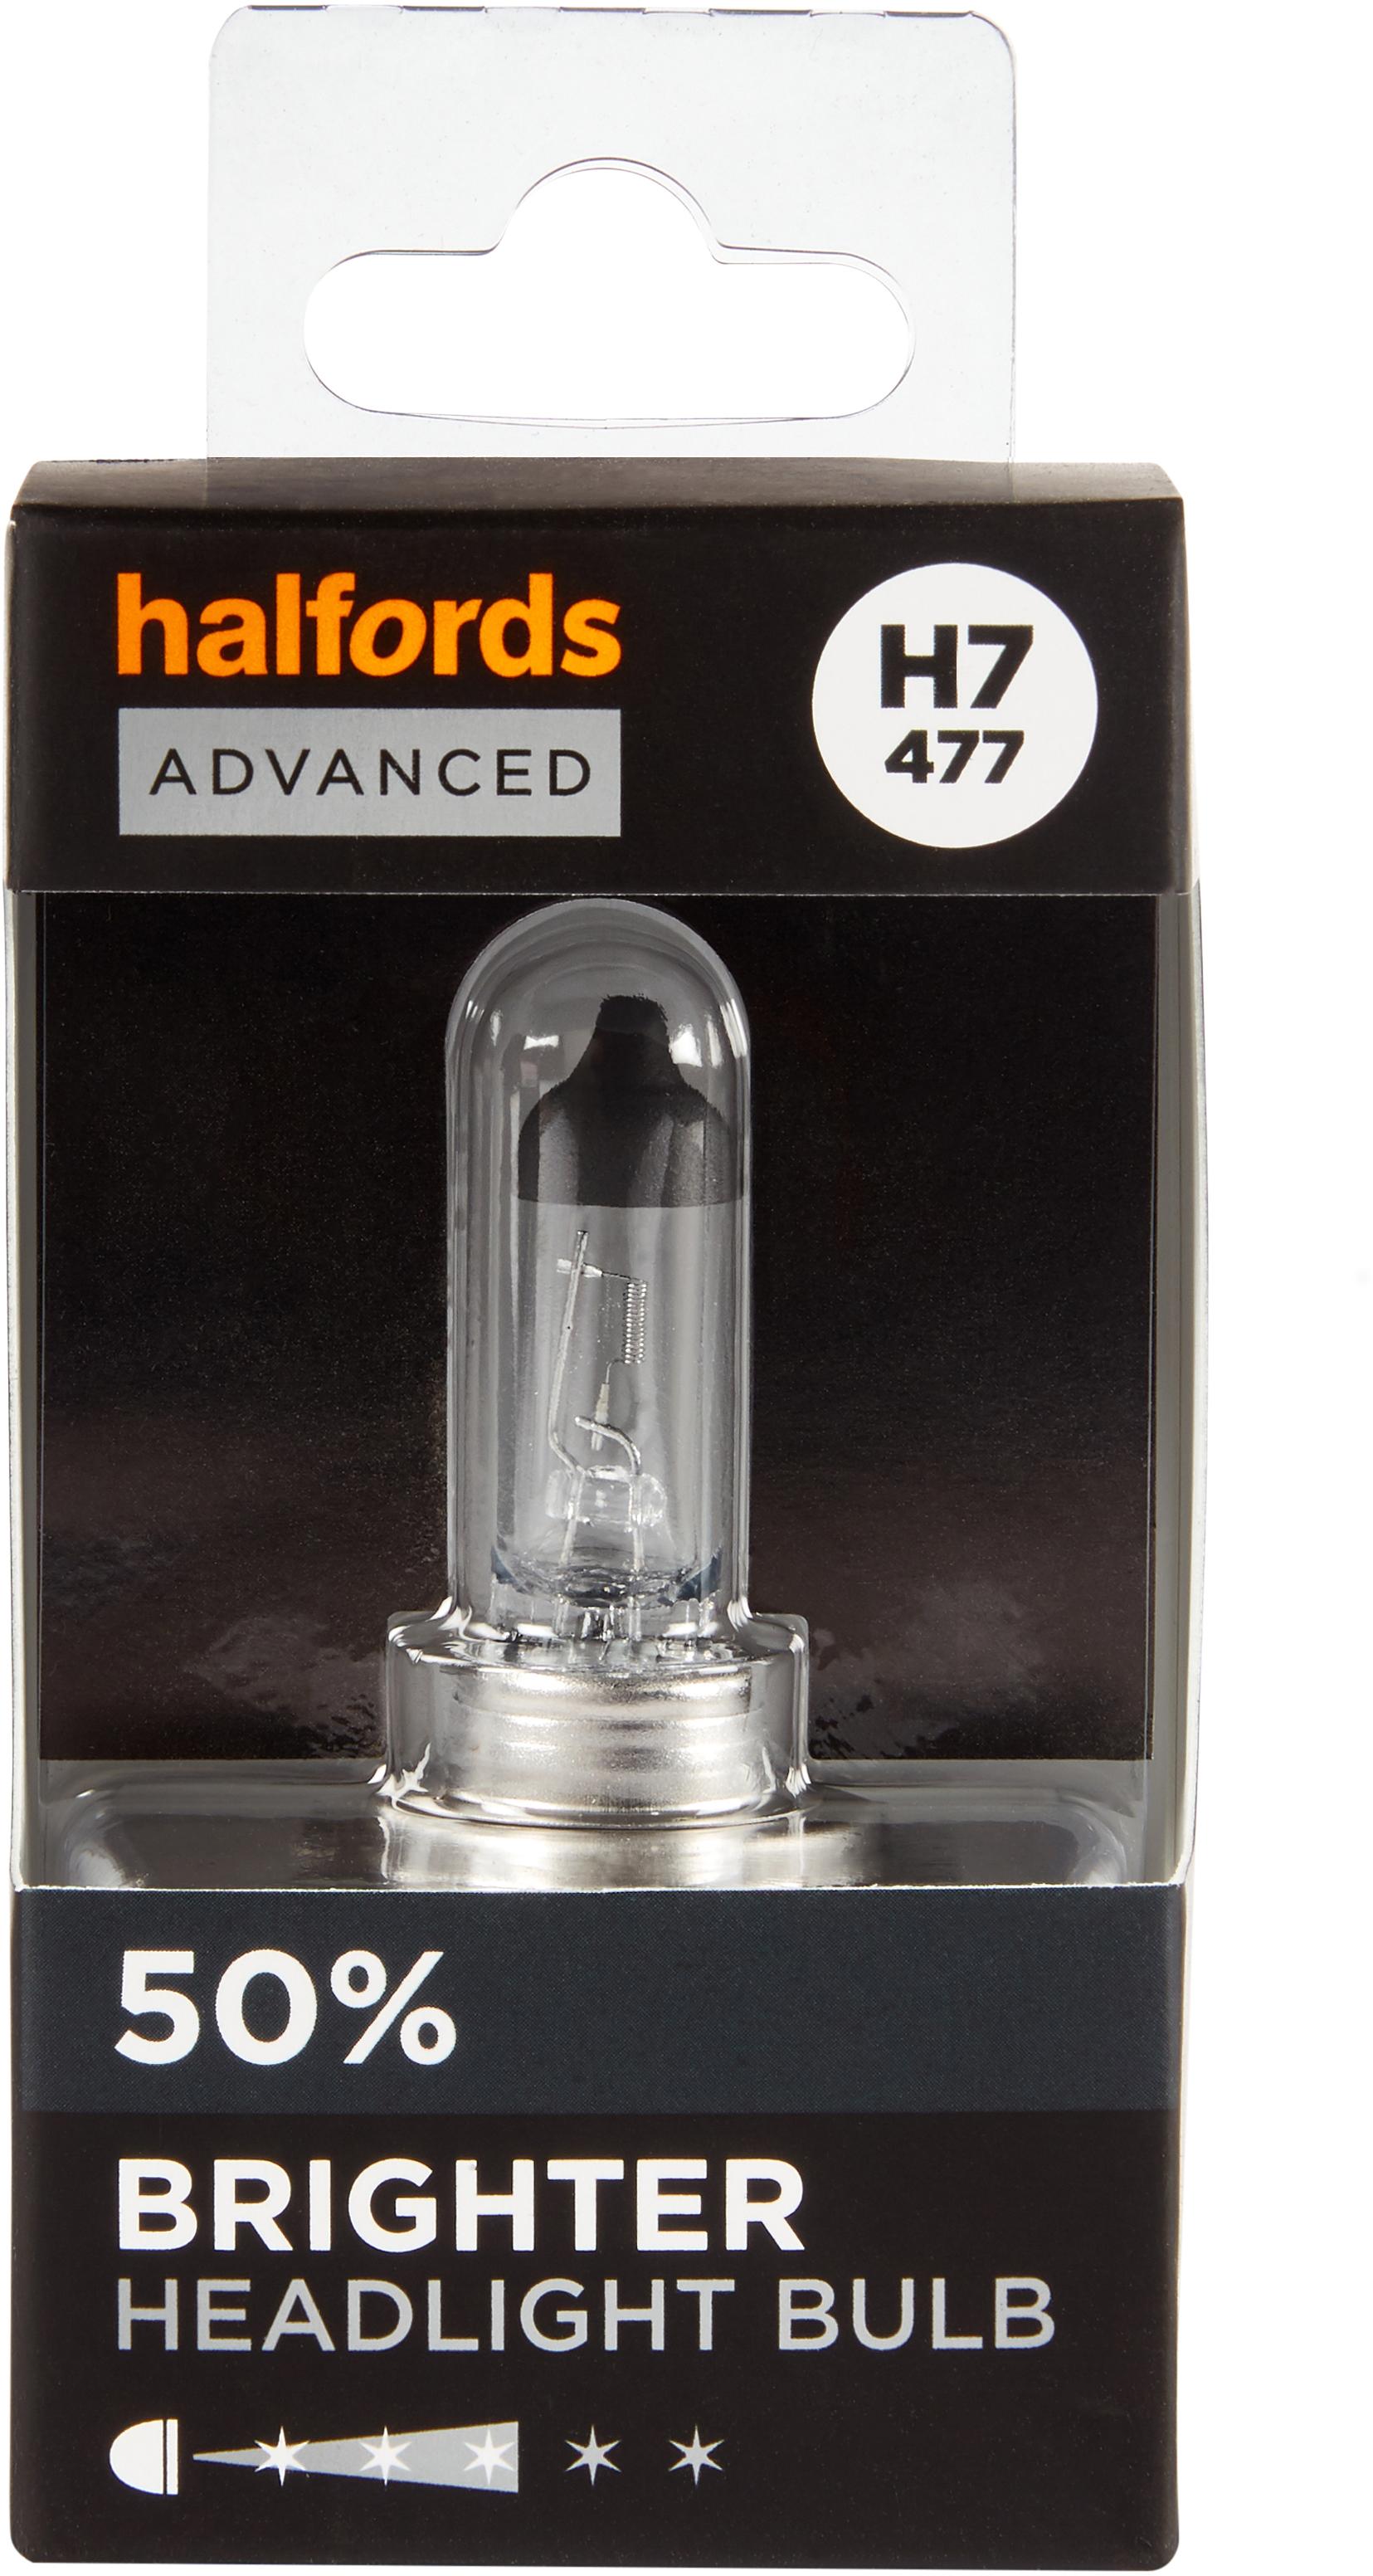 H7 477 Car Headlight Bulb Halfords Advanced Up To +50 Percent Brighter Single Pack